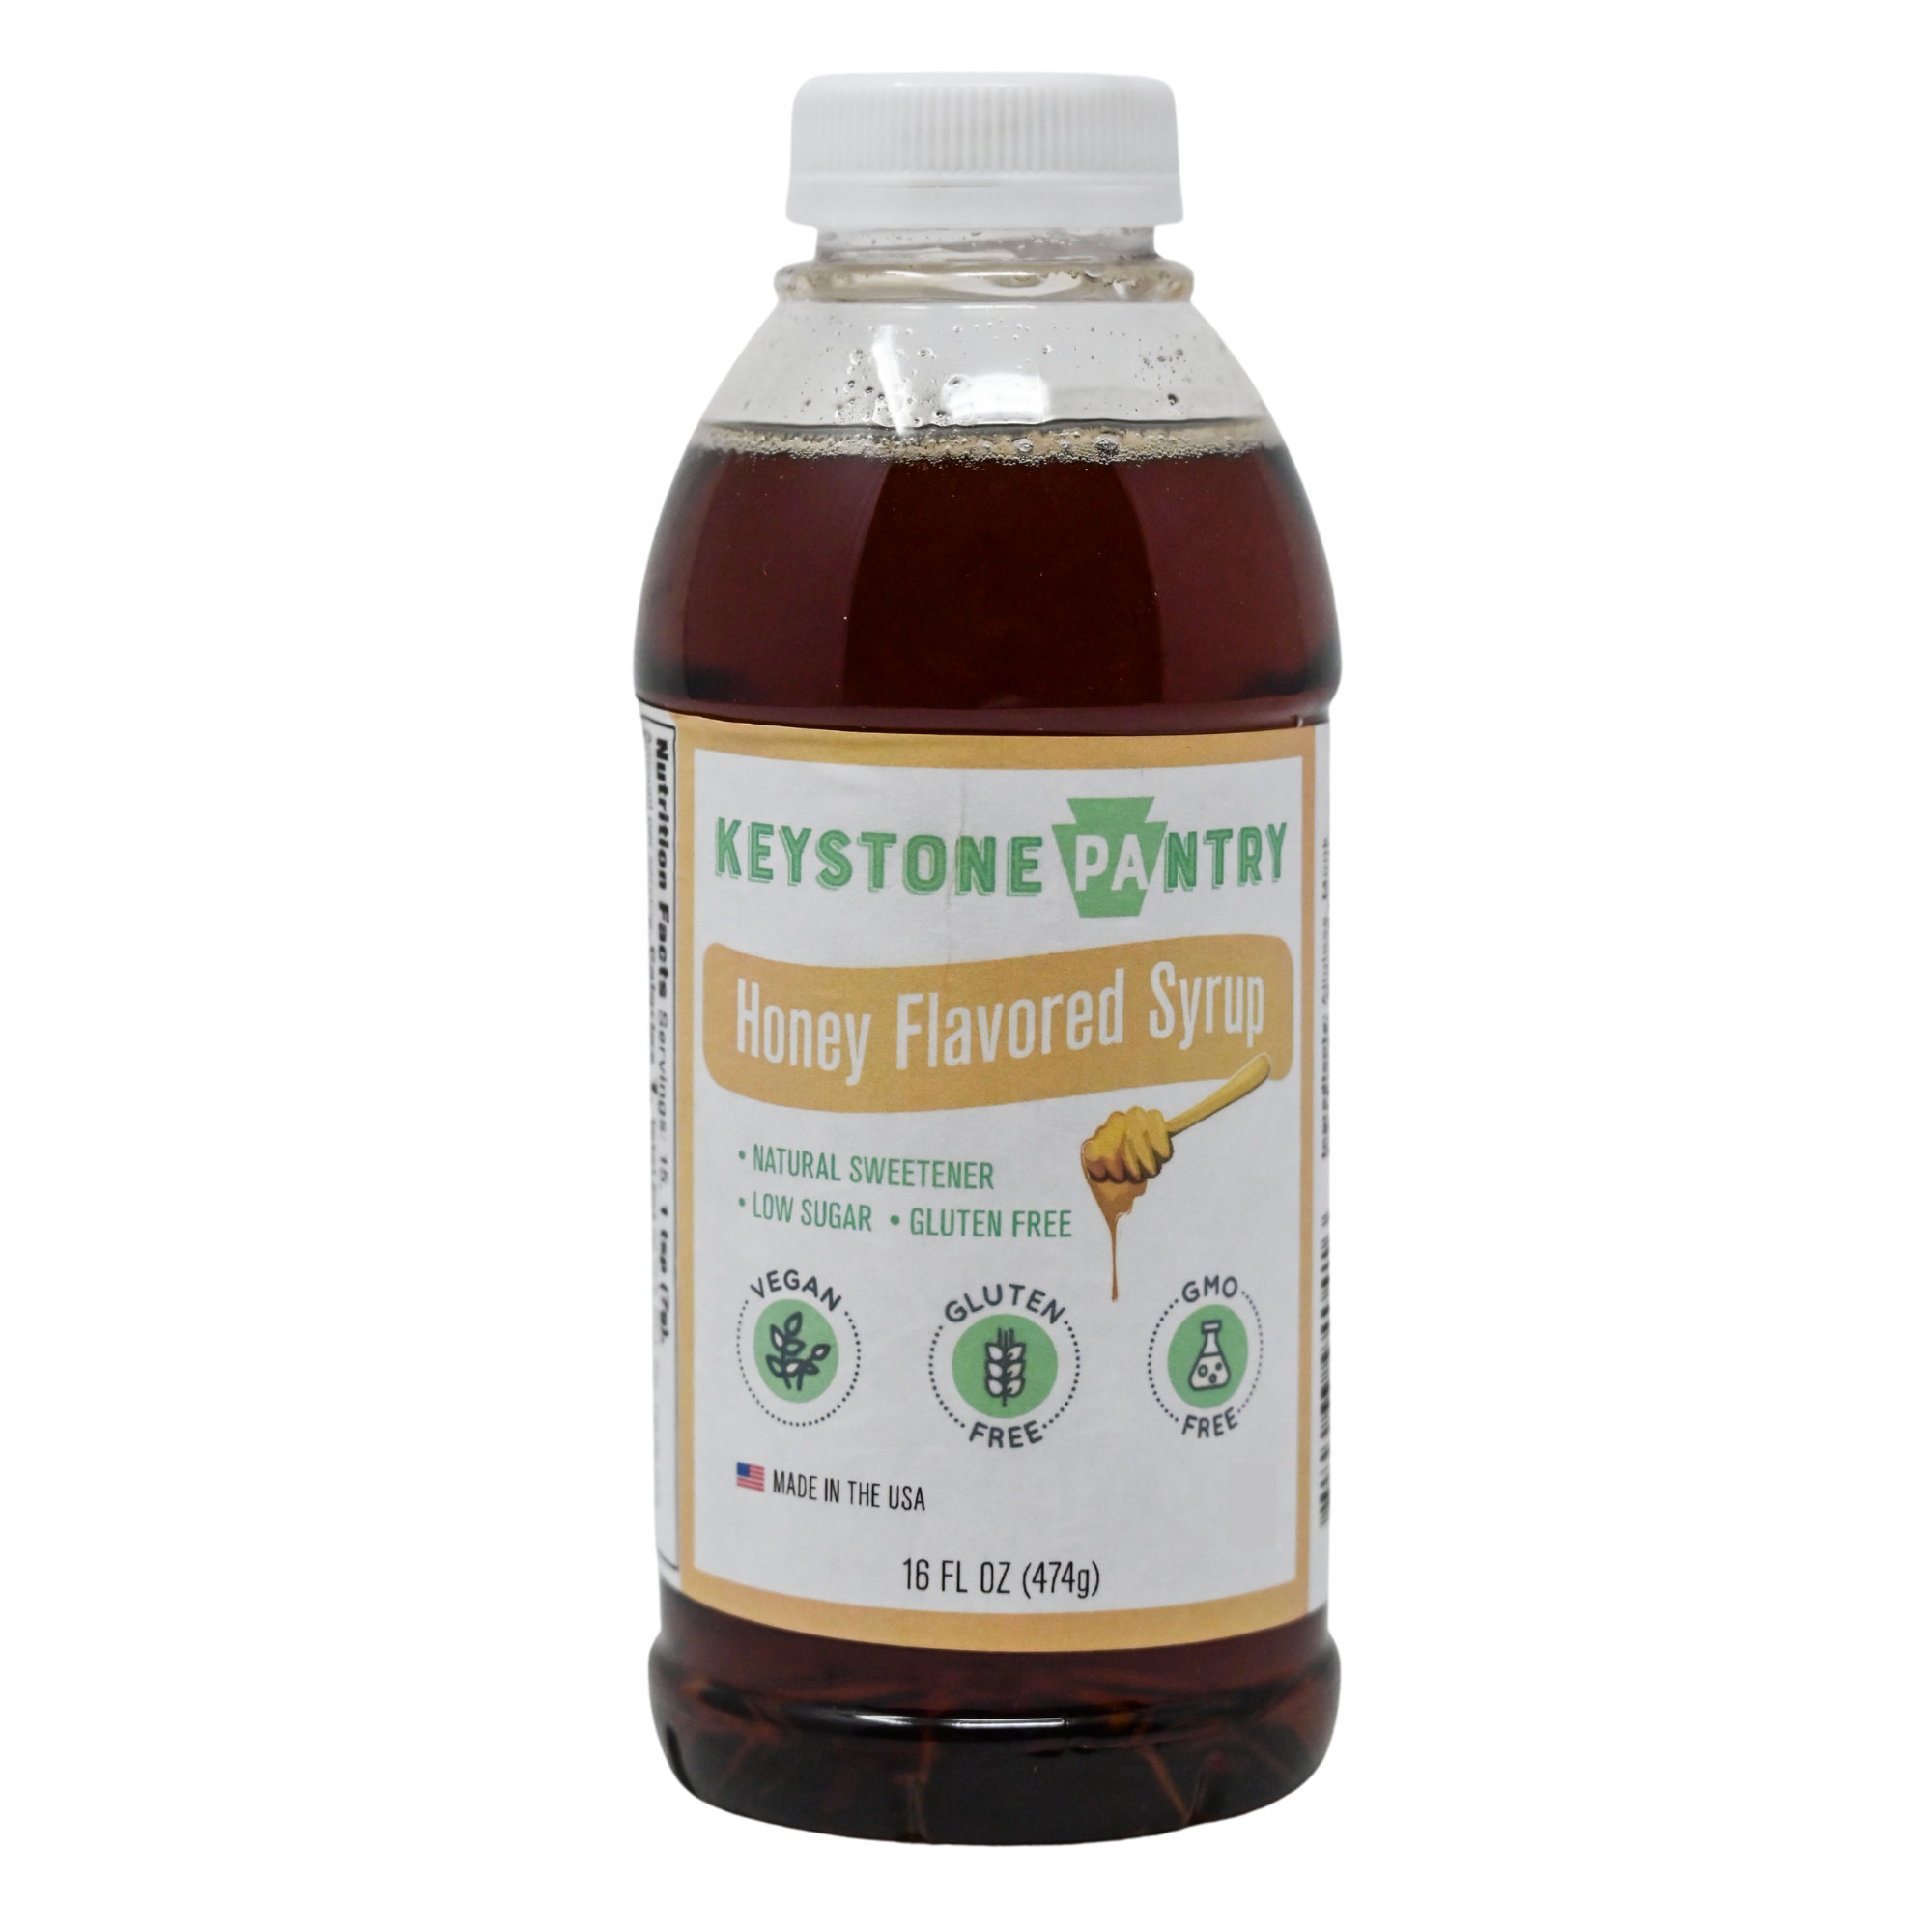 Keystone Pantry Honey Flavored Syrup with Monk Fruit 1 pint bottle